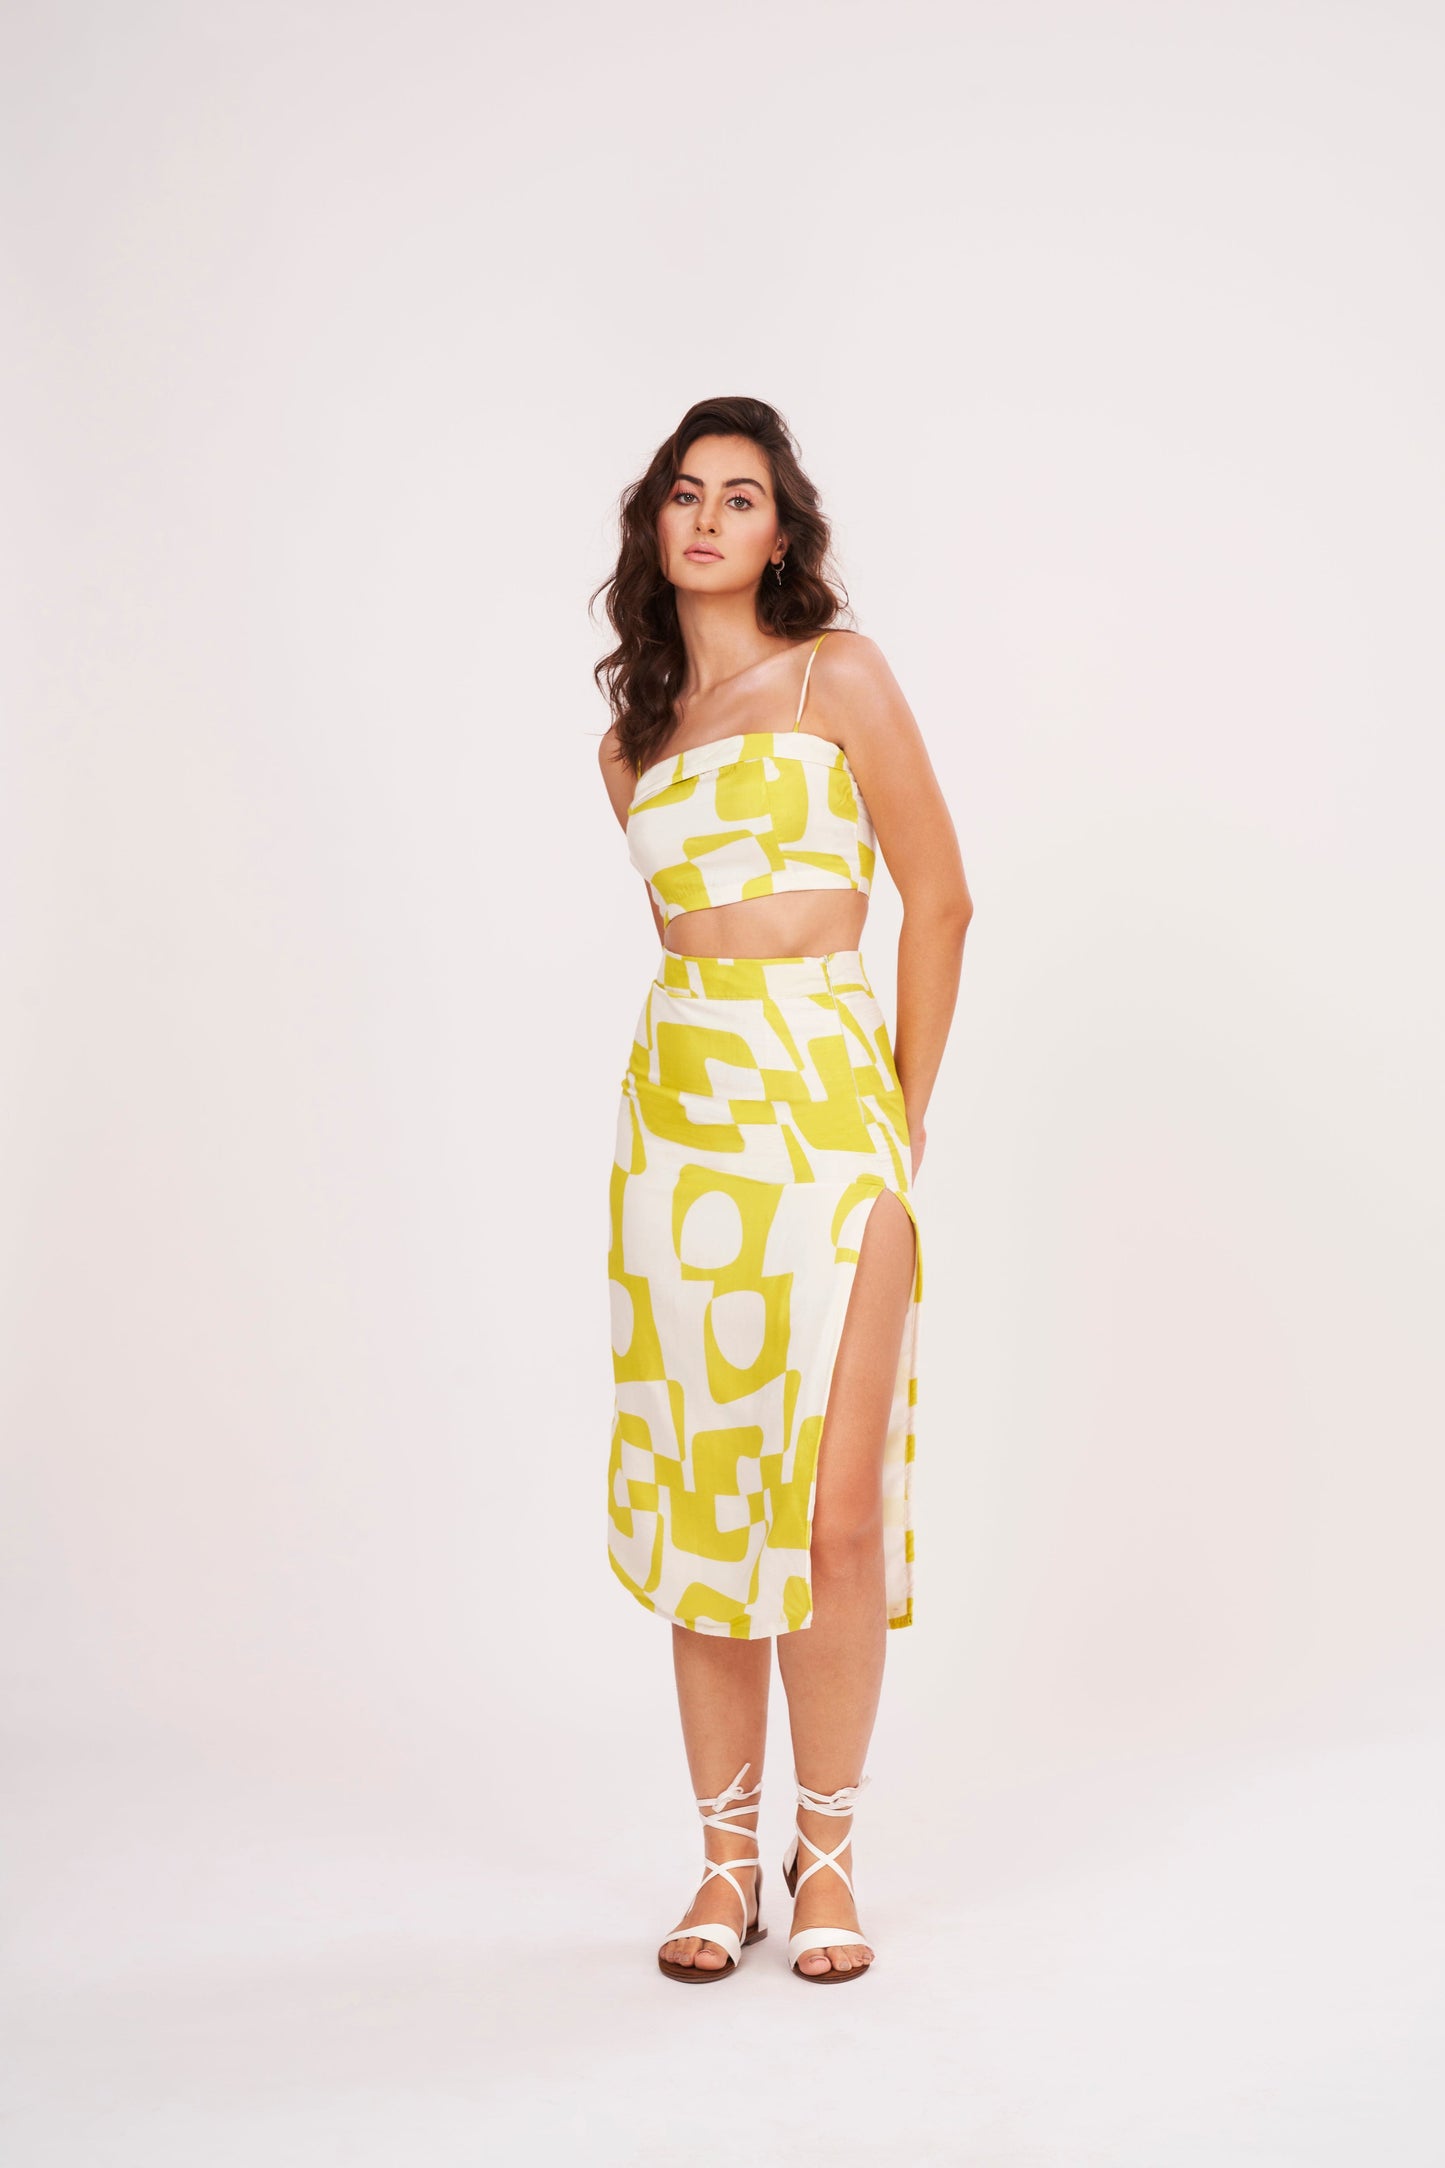 Chic Yellow Printed Skirt crafted from lightweight, premium muslin fabric, perfect for summer outings. 